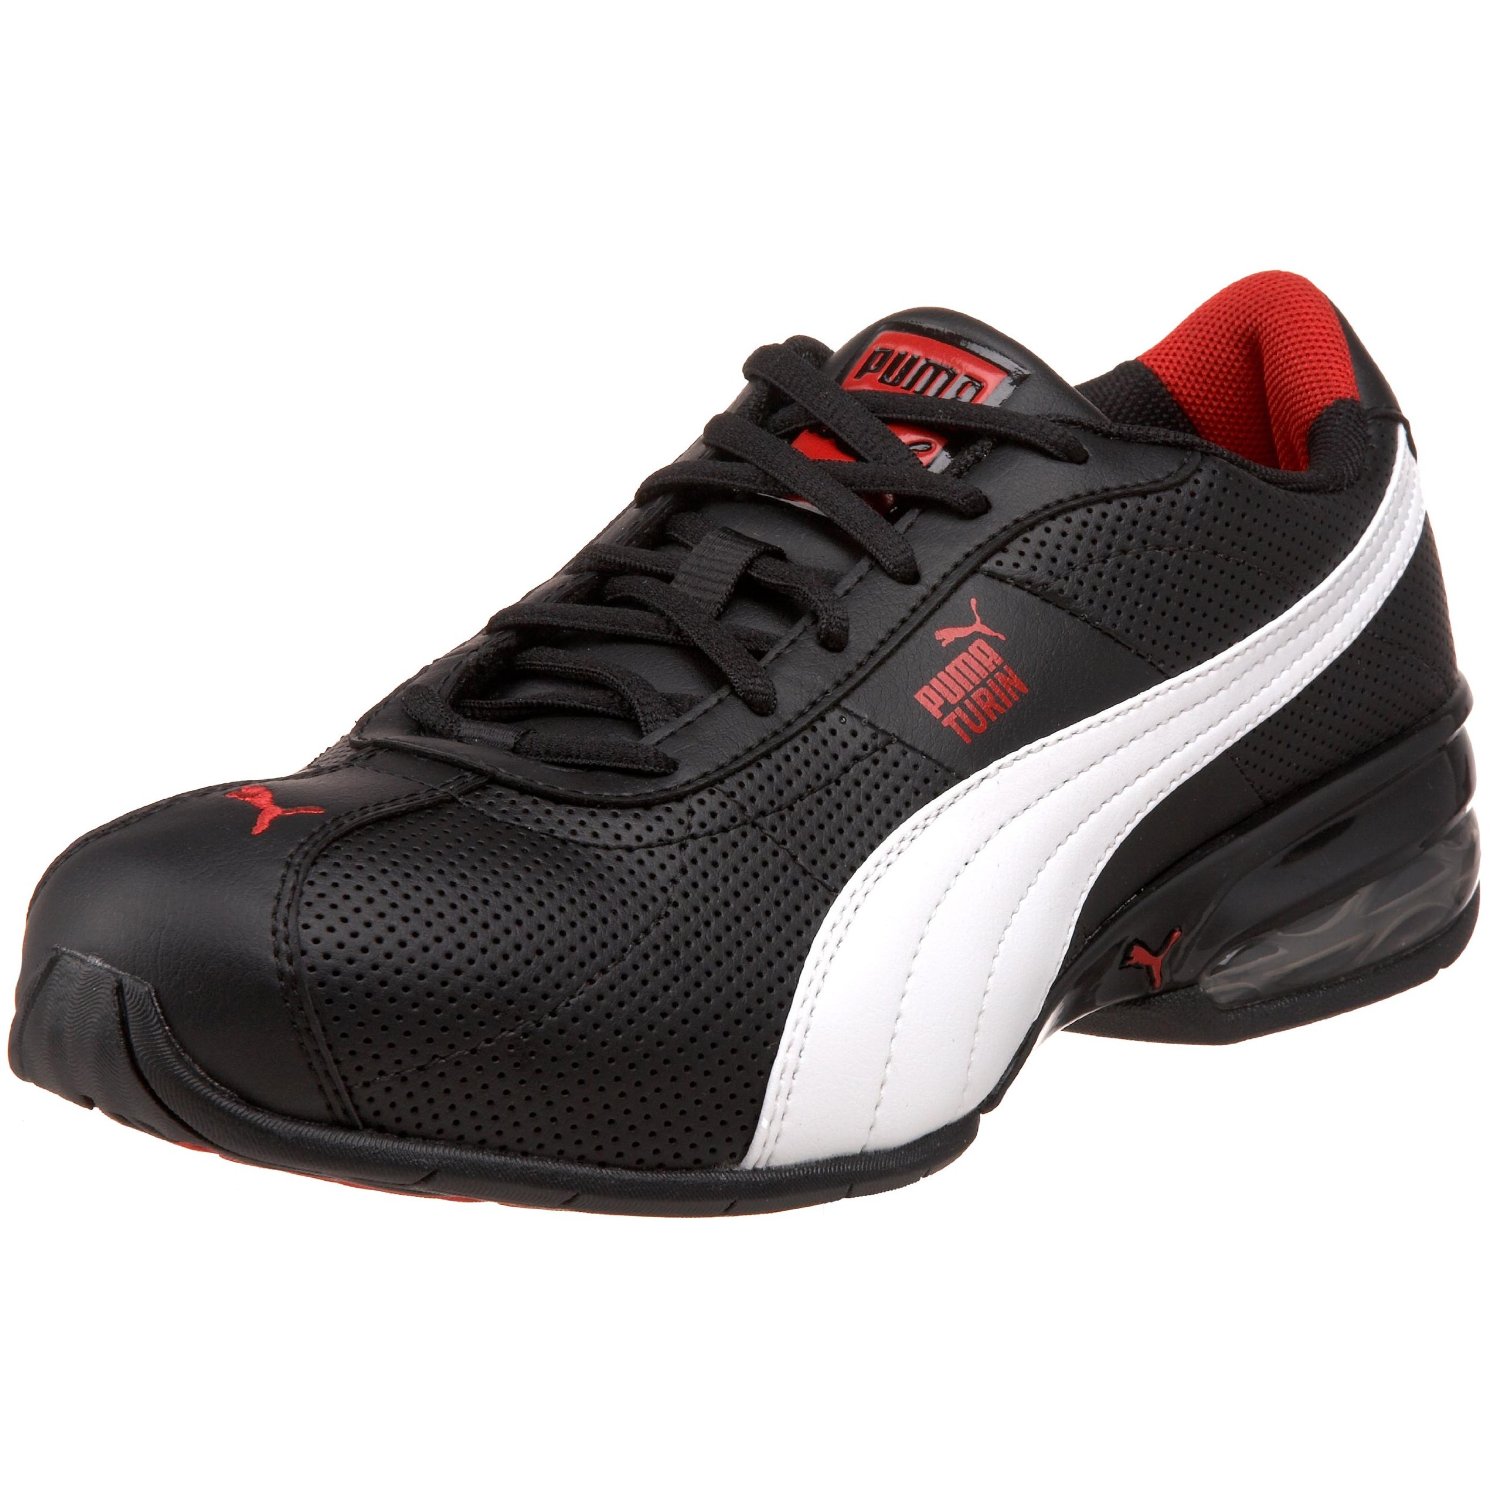 Get Puma Shoes Black Gif - Daily Shoes Update